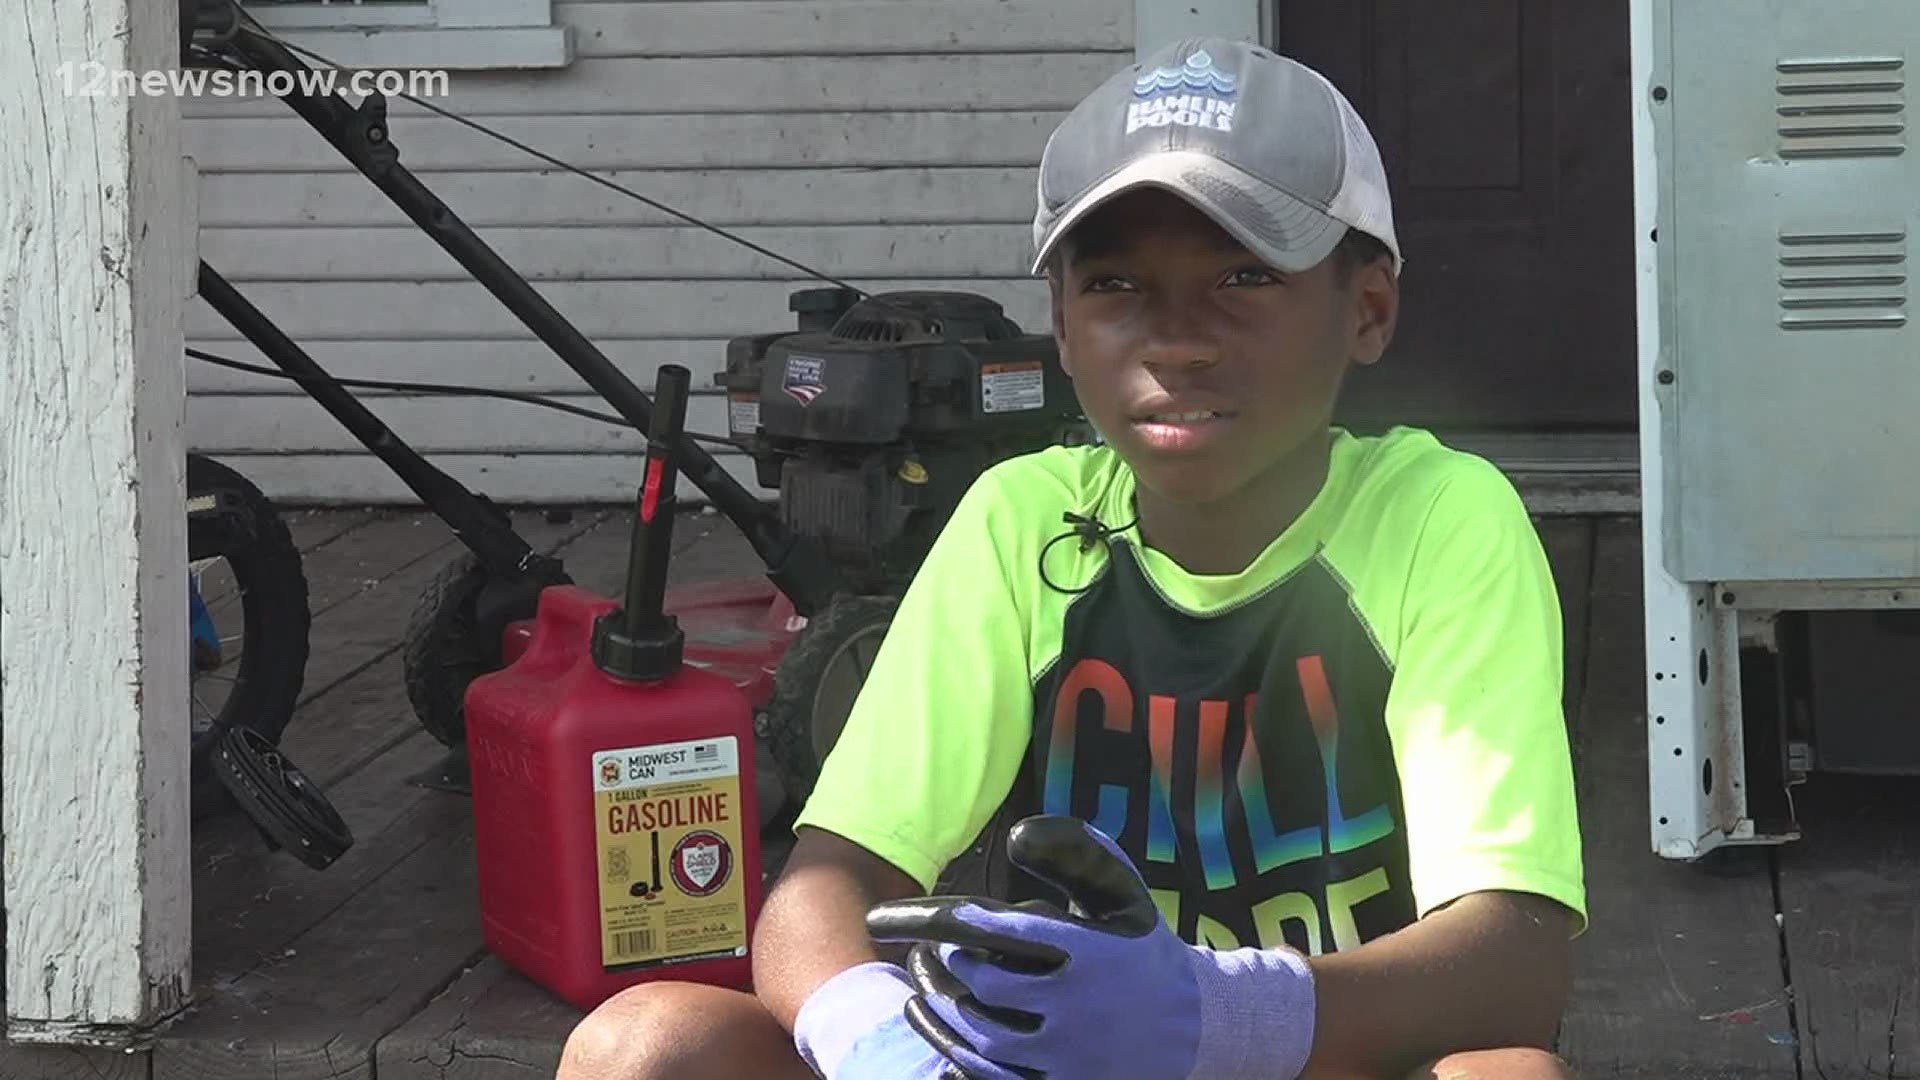 One boy's dream of owning a lawn care service is becoming a reality thanks to the random acts of kindness from strangers